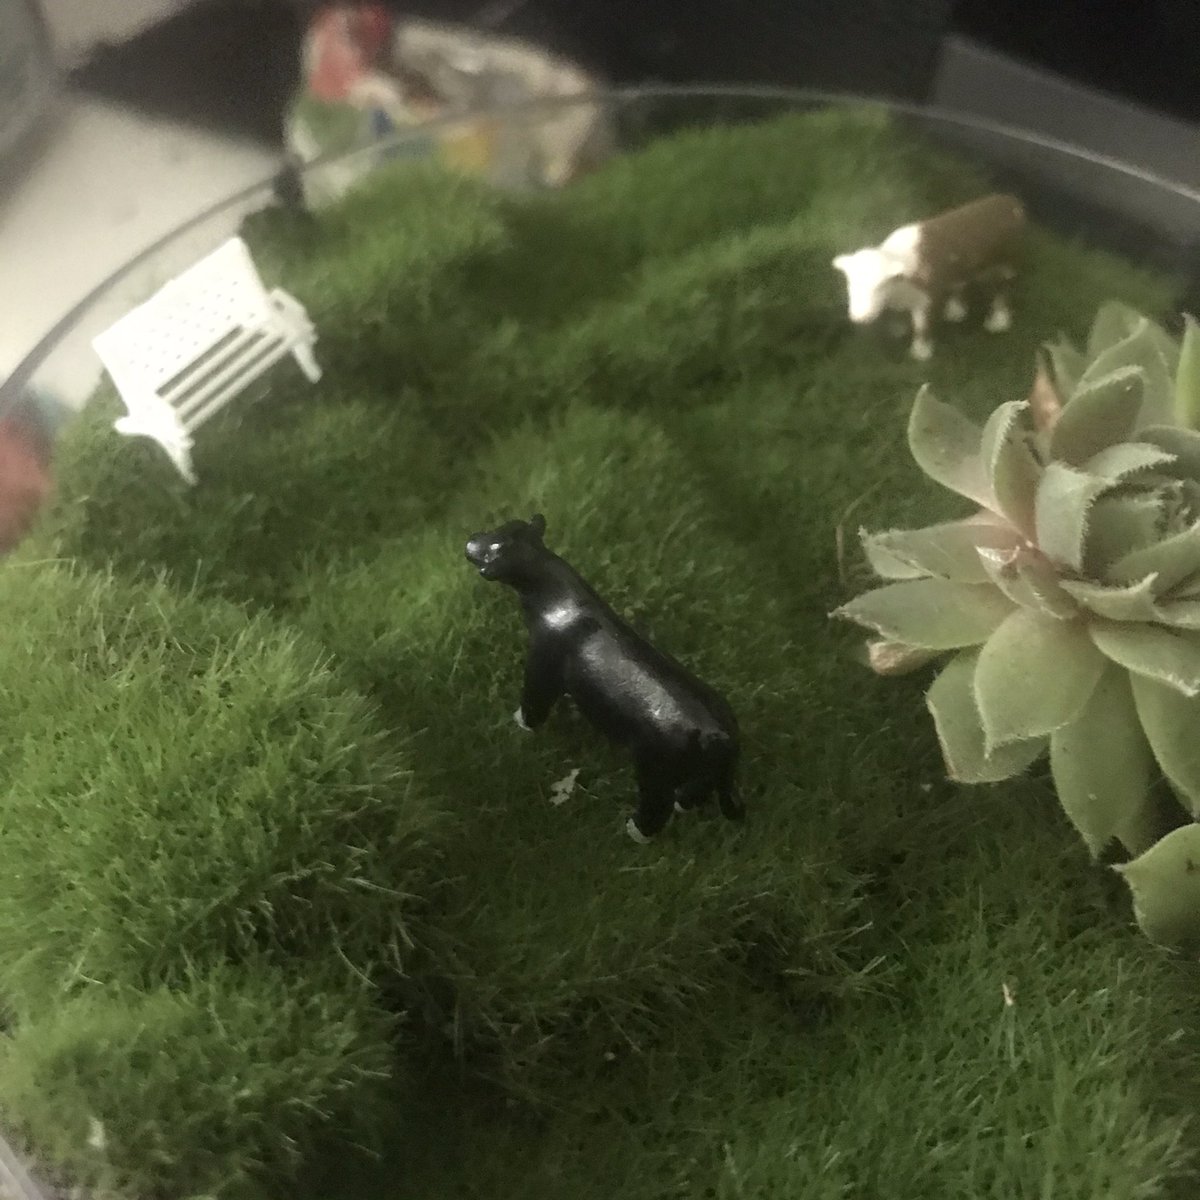 Here it goes. This is just a tiny cow & bench garden